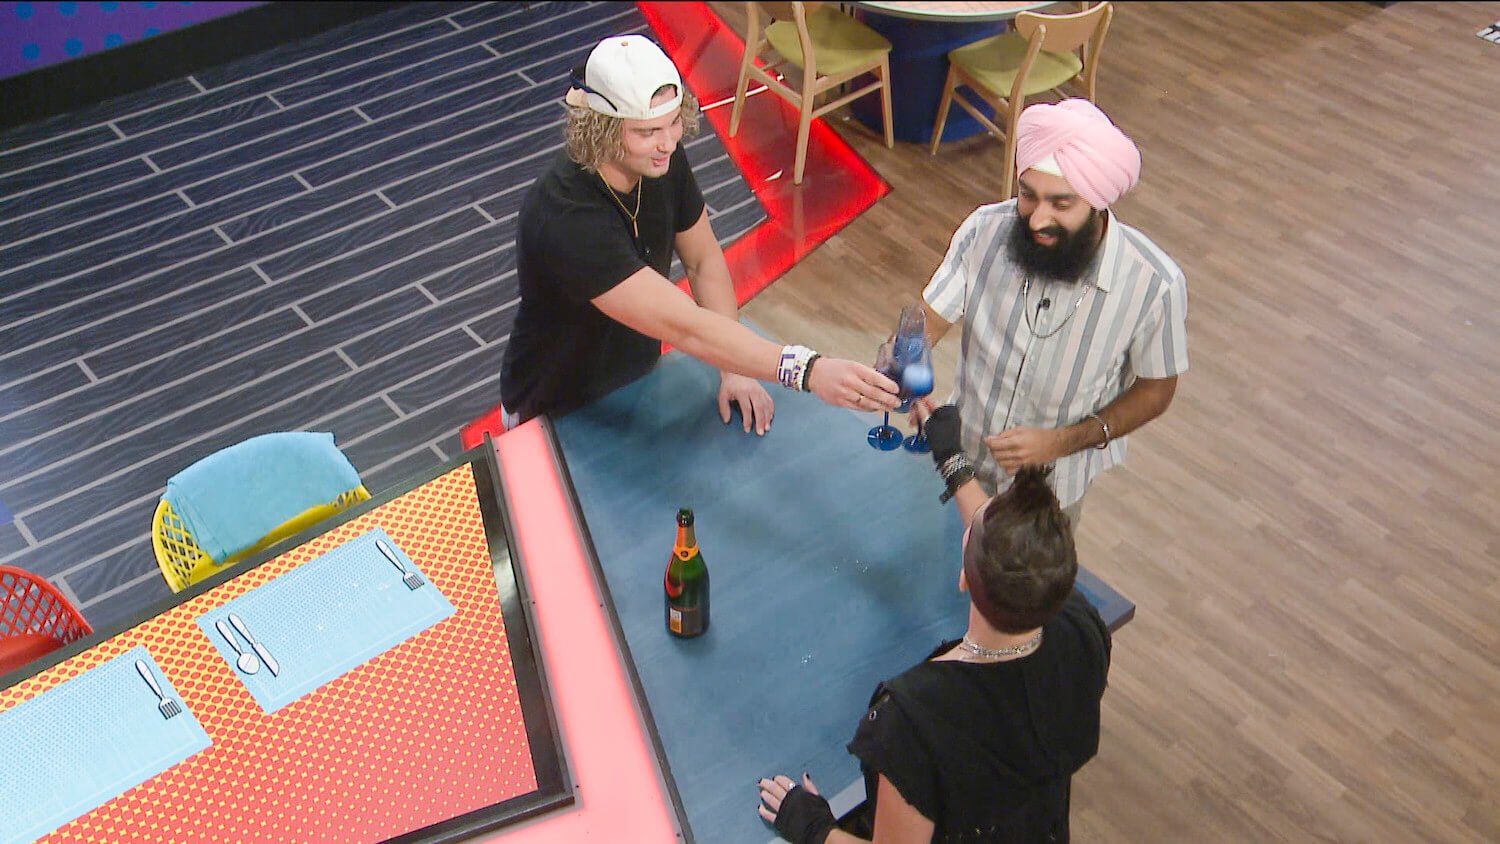 Matt Klotz, Jag Bains, and Bowie Jane toasting during the 'Big Brother' Season 25 finale week